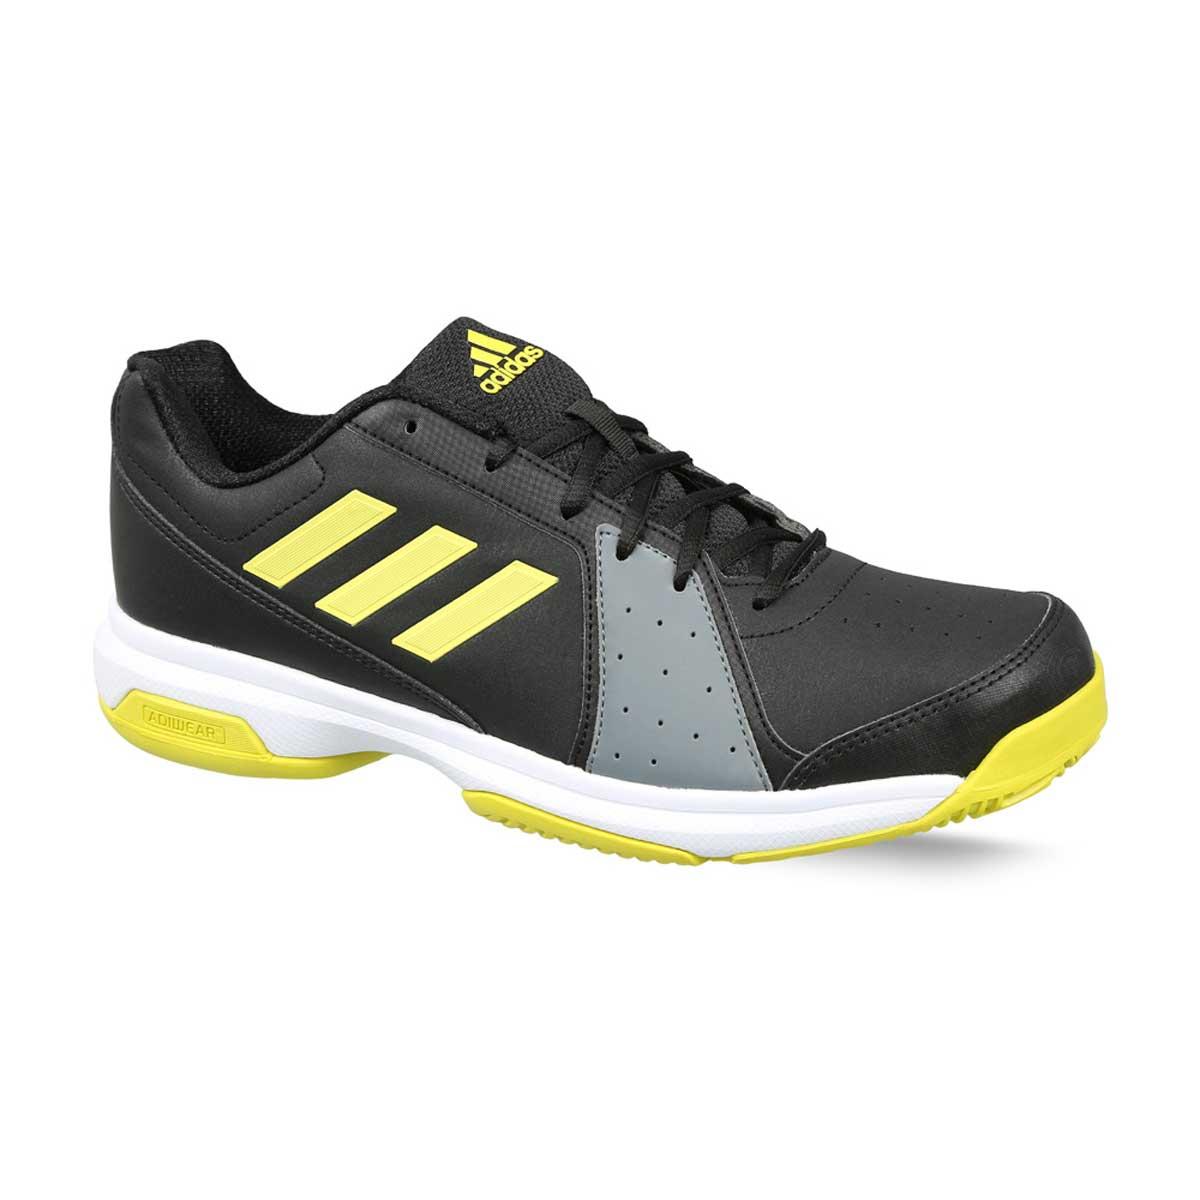 Buy Adidas Approach Tennis Shoes (Black/Green) Online in India